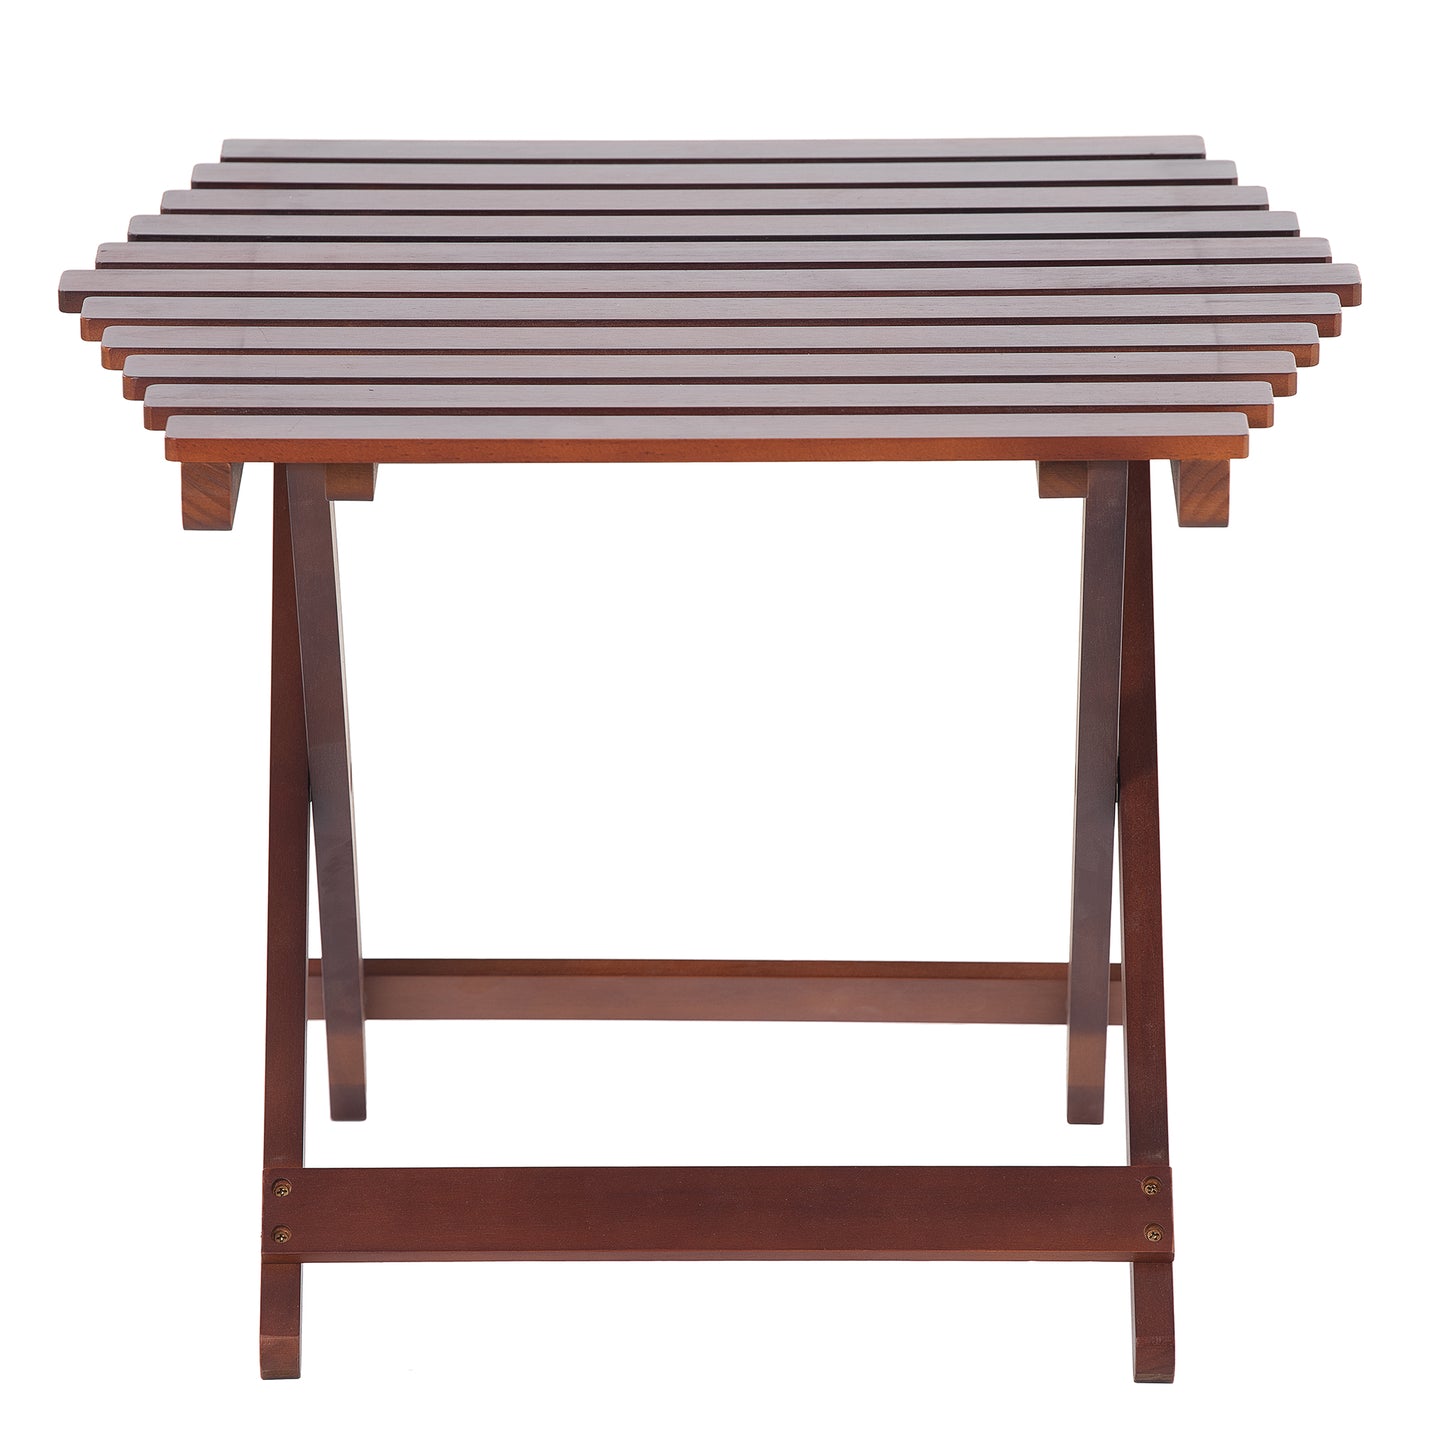 Pine Wood Folding Table, no assembly required (Square-Brown)